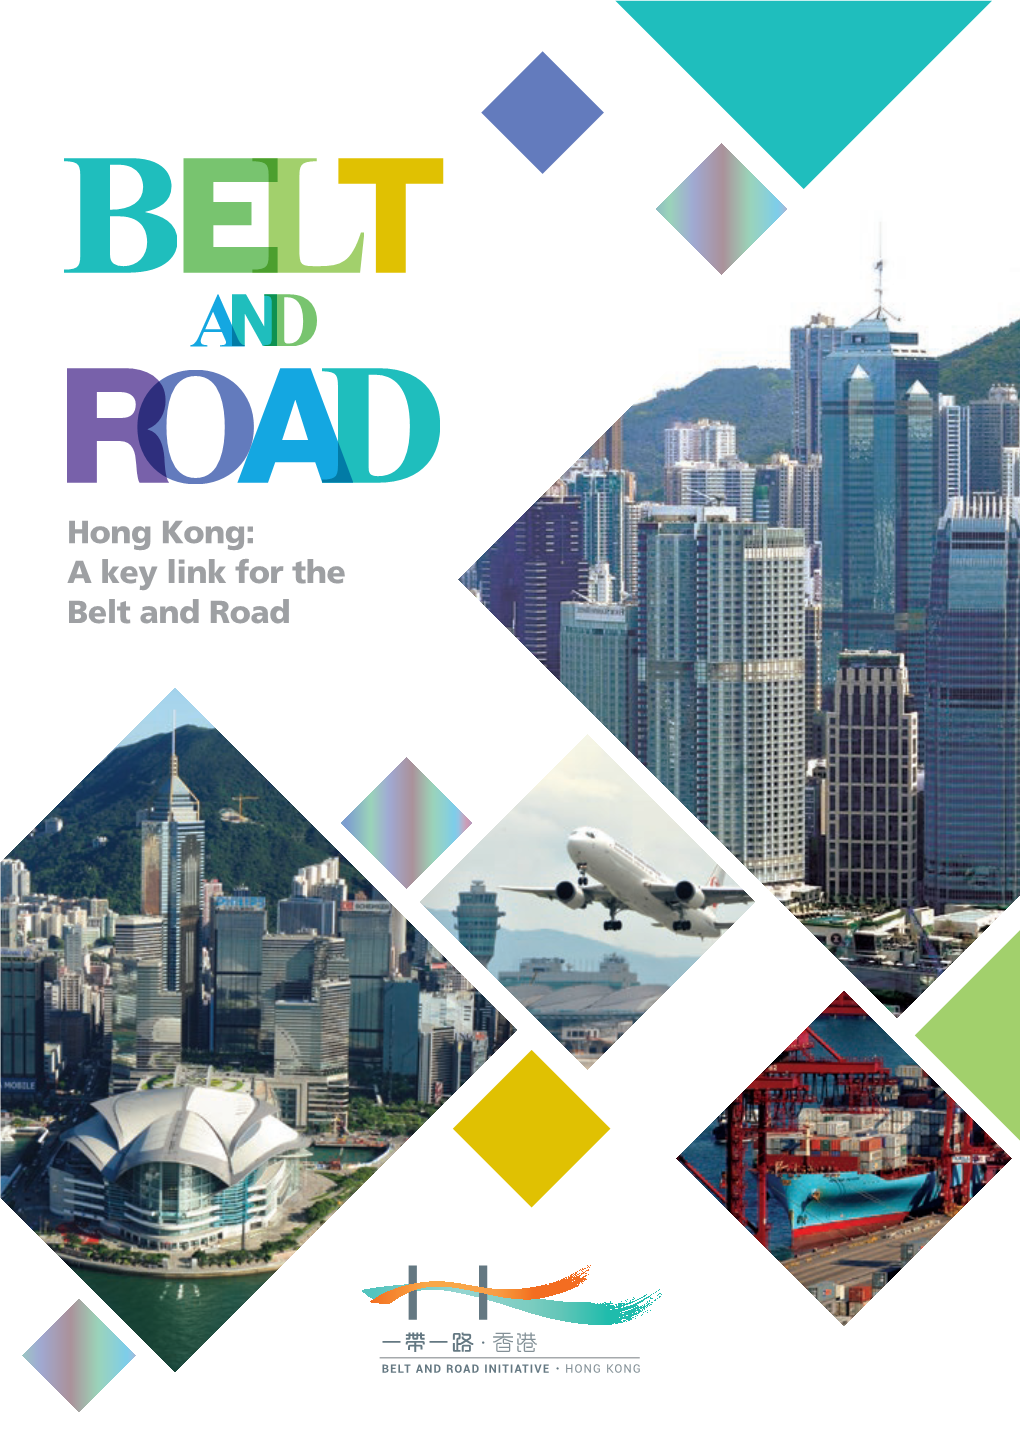 Hong Kong: a Key Link for the Belt and Road